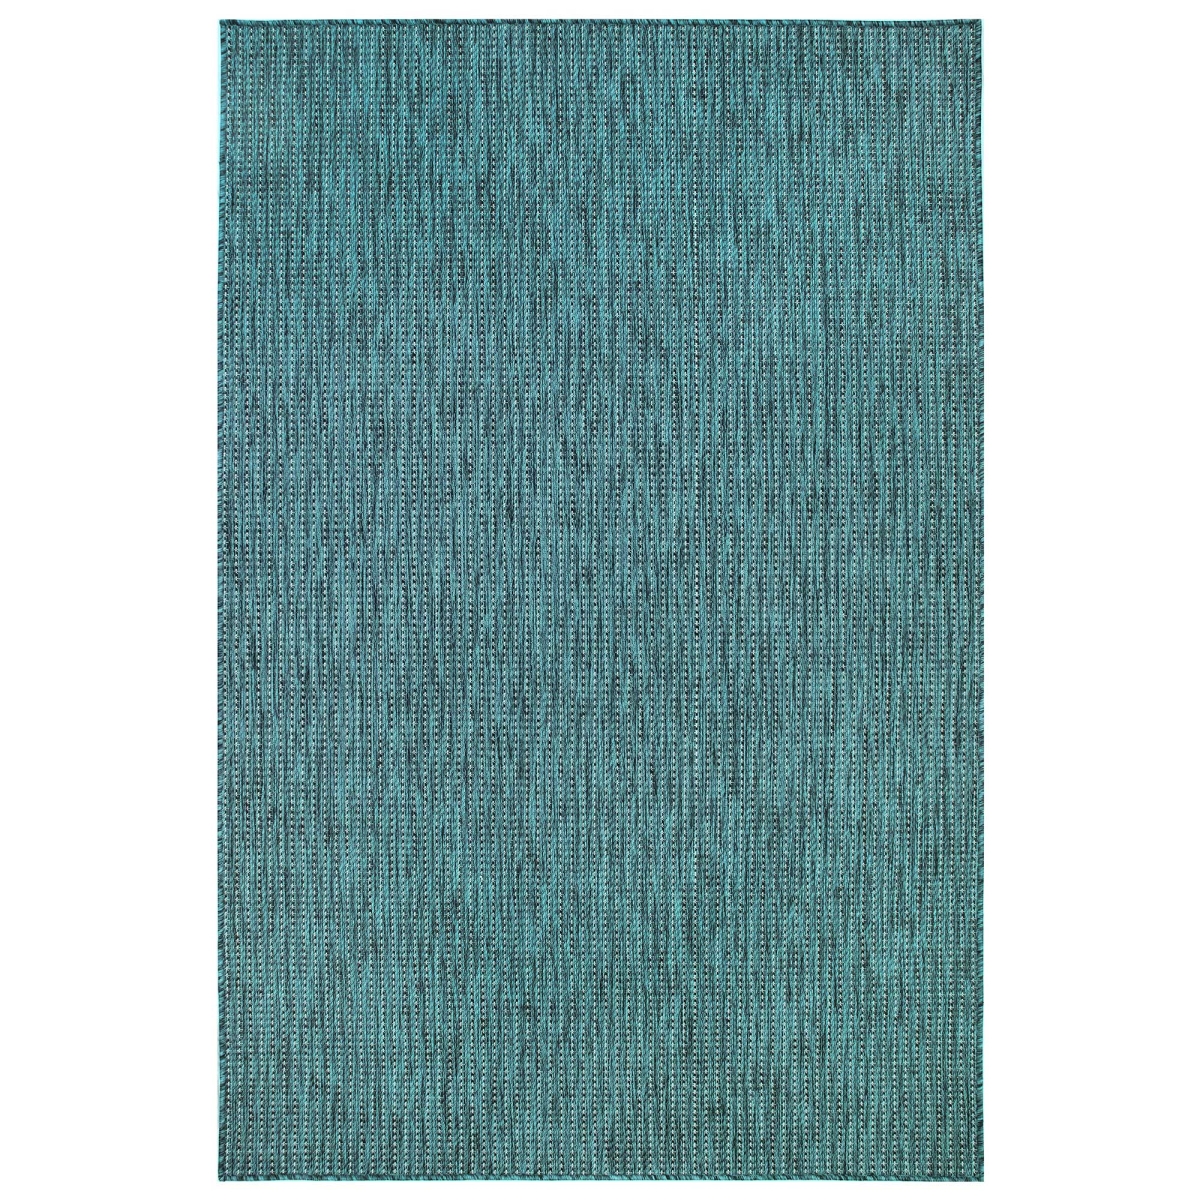 Trans-ocean Imports Cre69842294 6 Ft. 6 In. X 9 Ft. 4 In. Liora Manne Carmel Texture Stripe Indoor & Outdoor Rug Wilton Woven Rectangular Rug - Teal